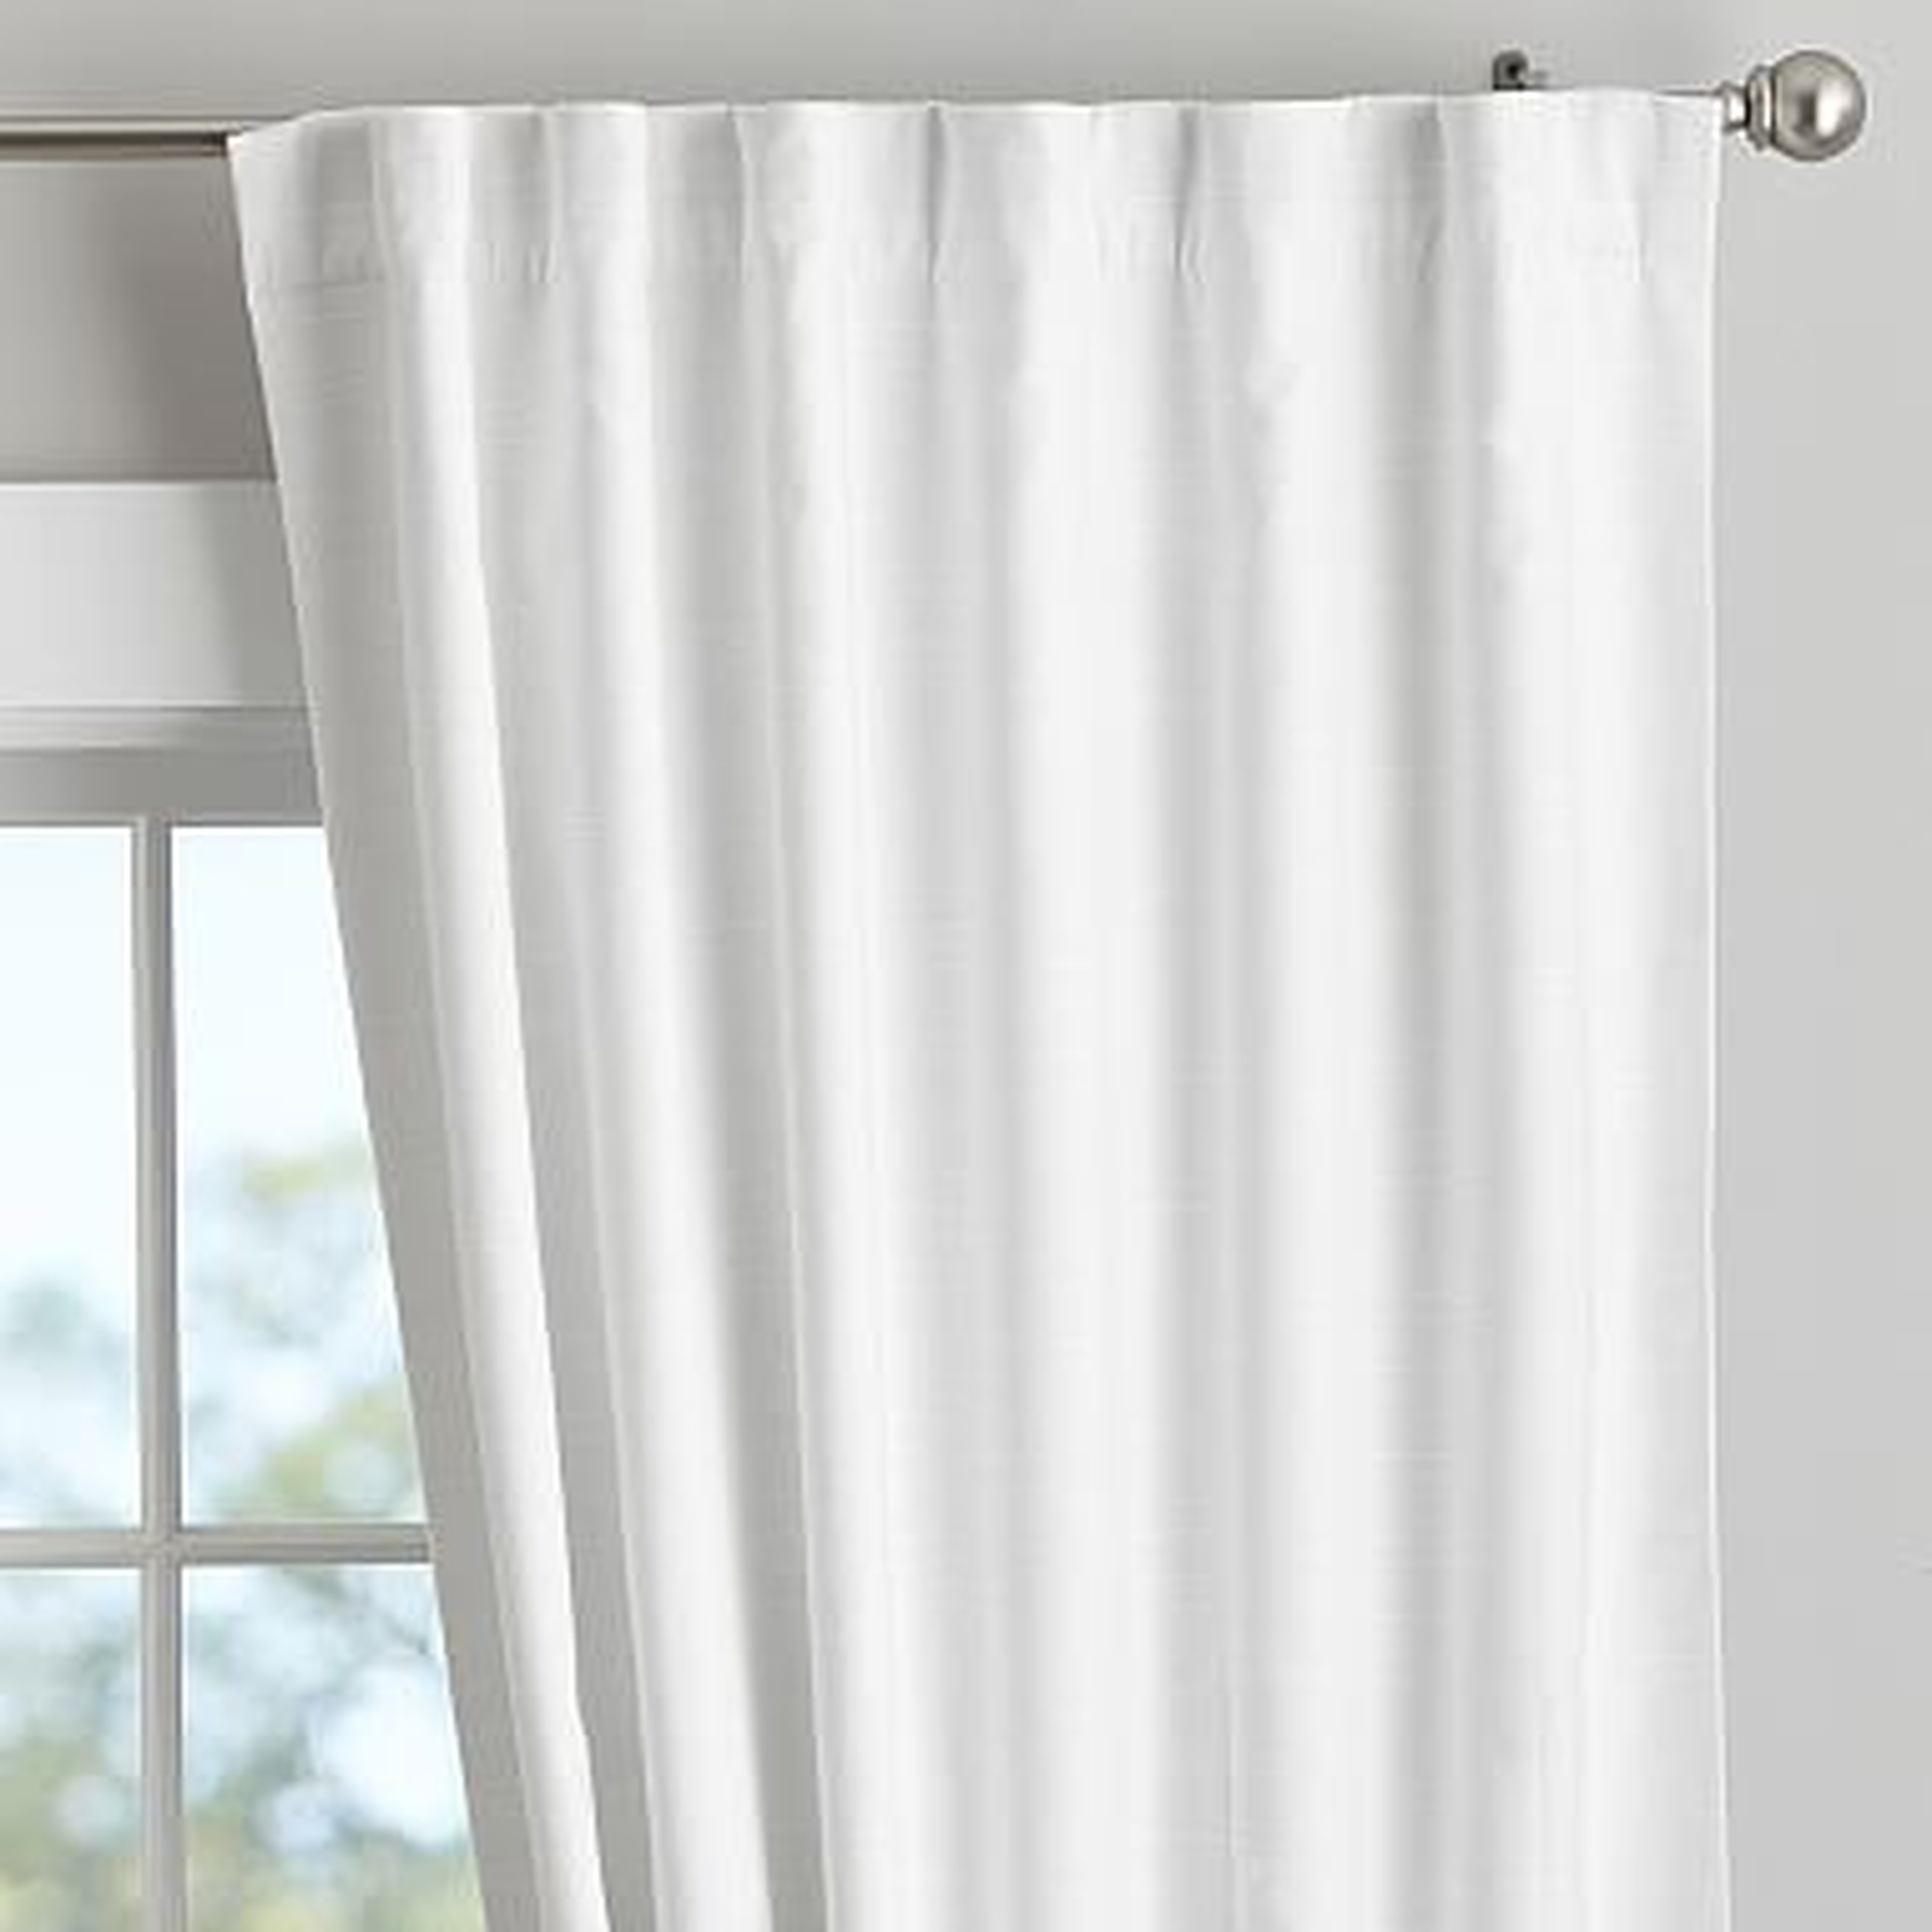 Classic Linen Blackout Curtain - Set of 2, 84", White - Pottery Barn Teen